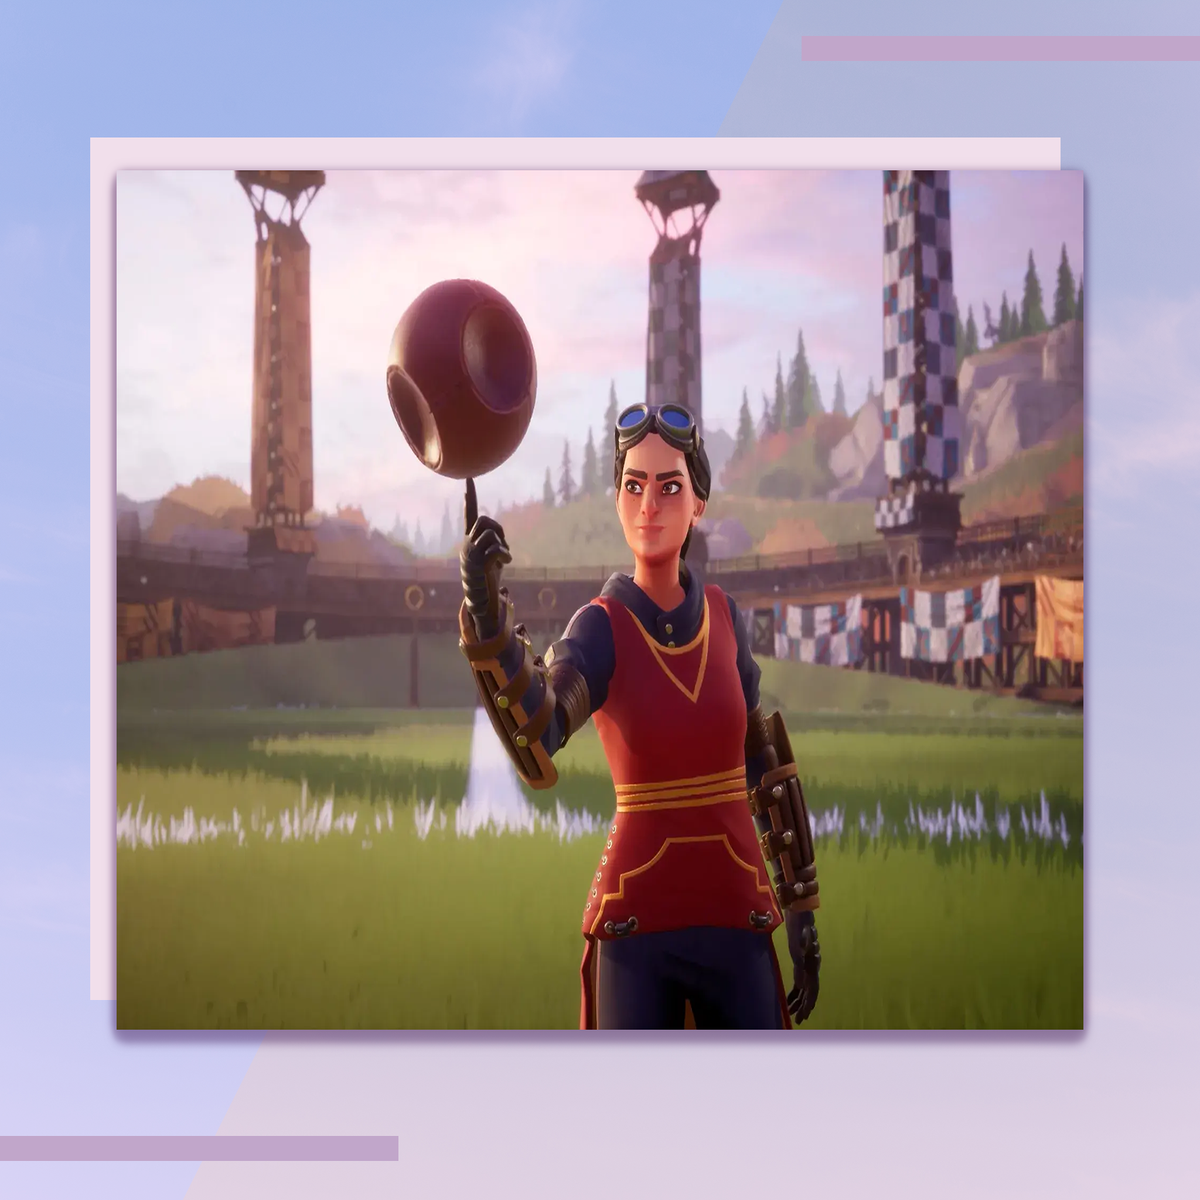 How to Link Your WB Account With Hogwarts Legacy - Fortnite Insider